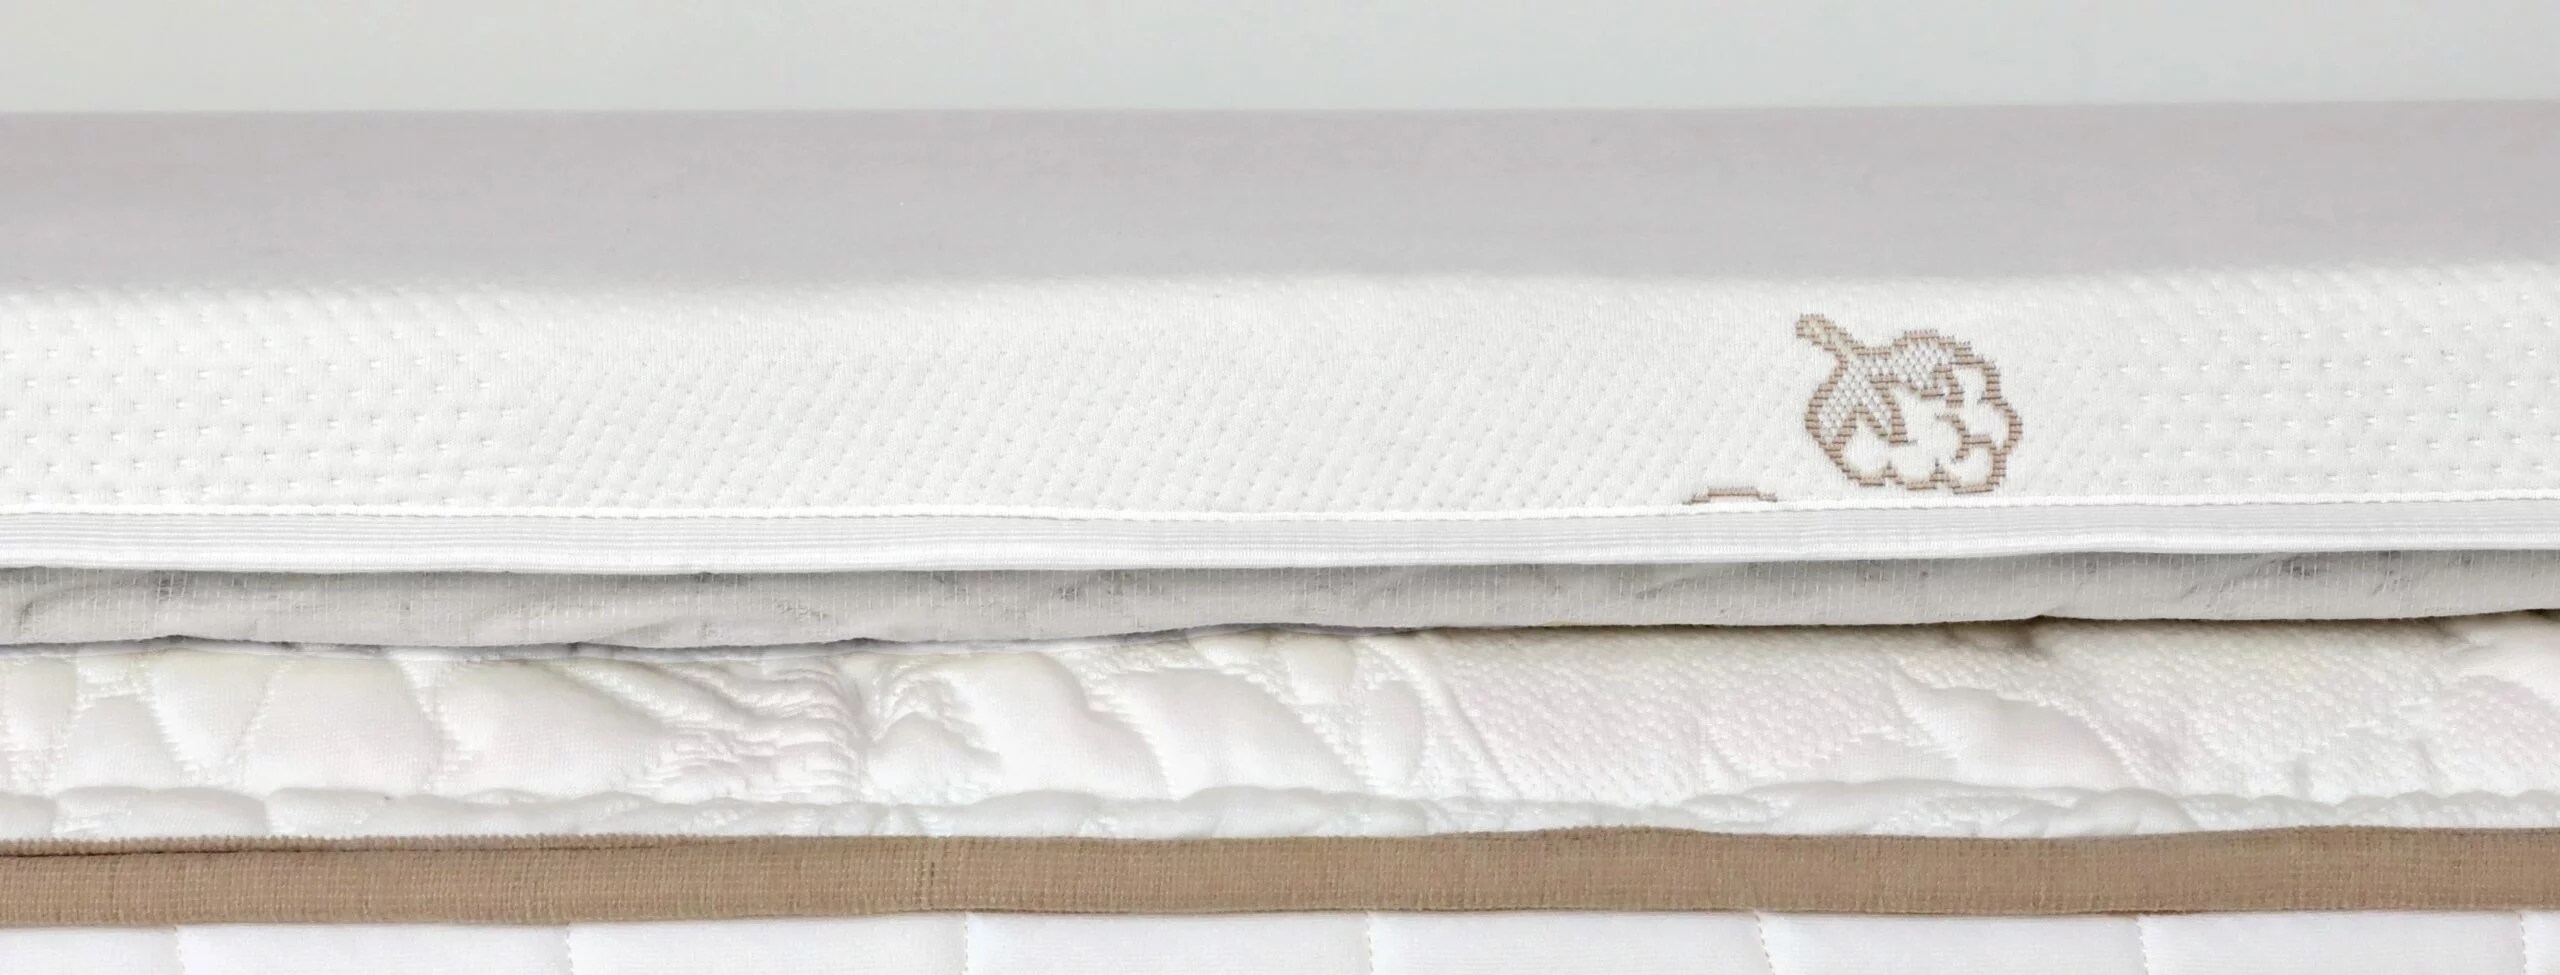 Made of memory foam and replete with a moisture-wicking organic cotton cover, this Saatva option is one of the best mattress toppers for hip pain.